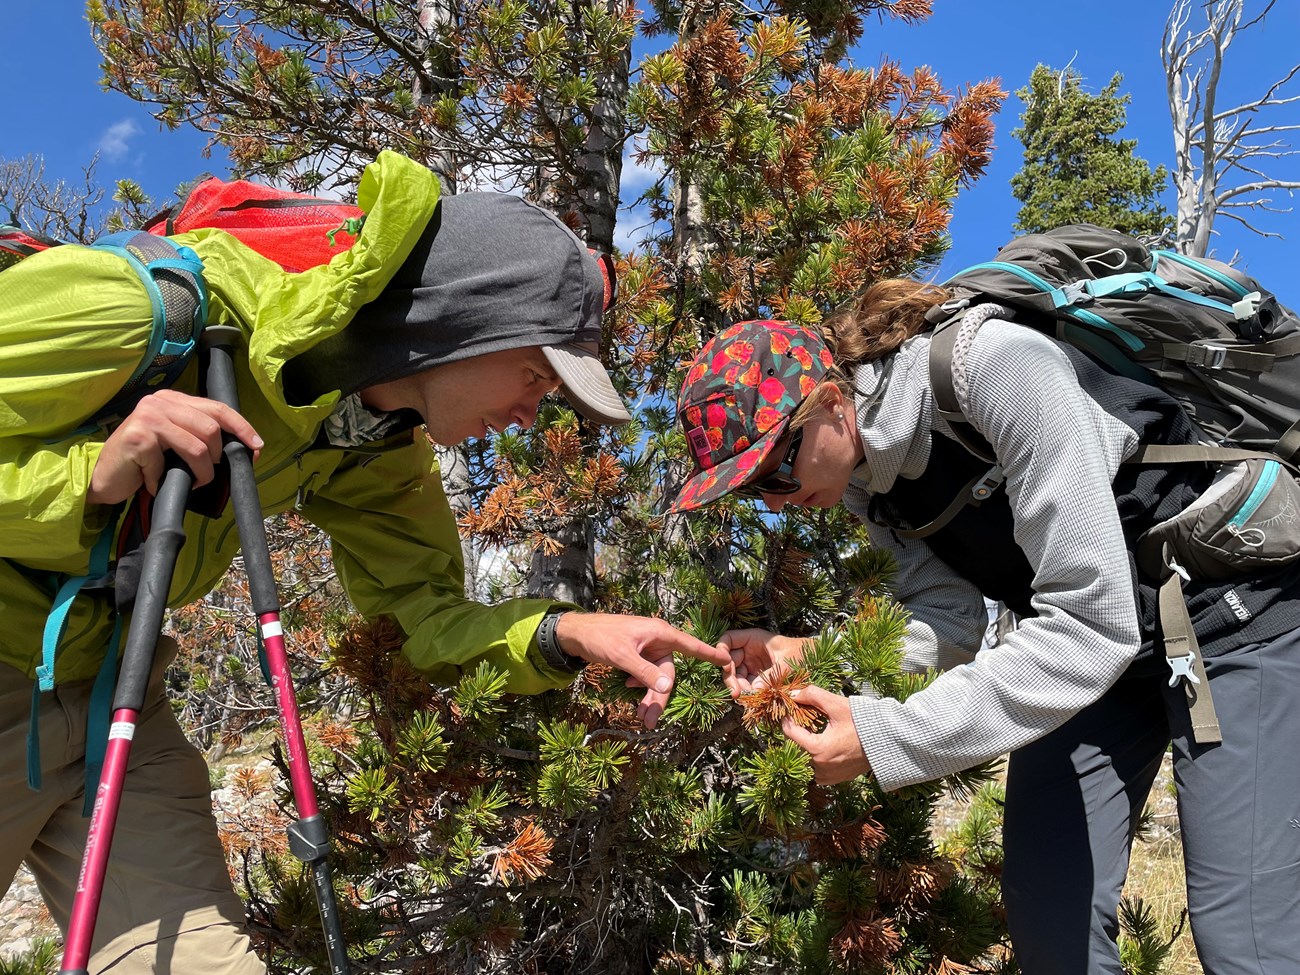 Two people inspect a clump of dead needles on a young whitebark pine tree.